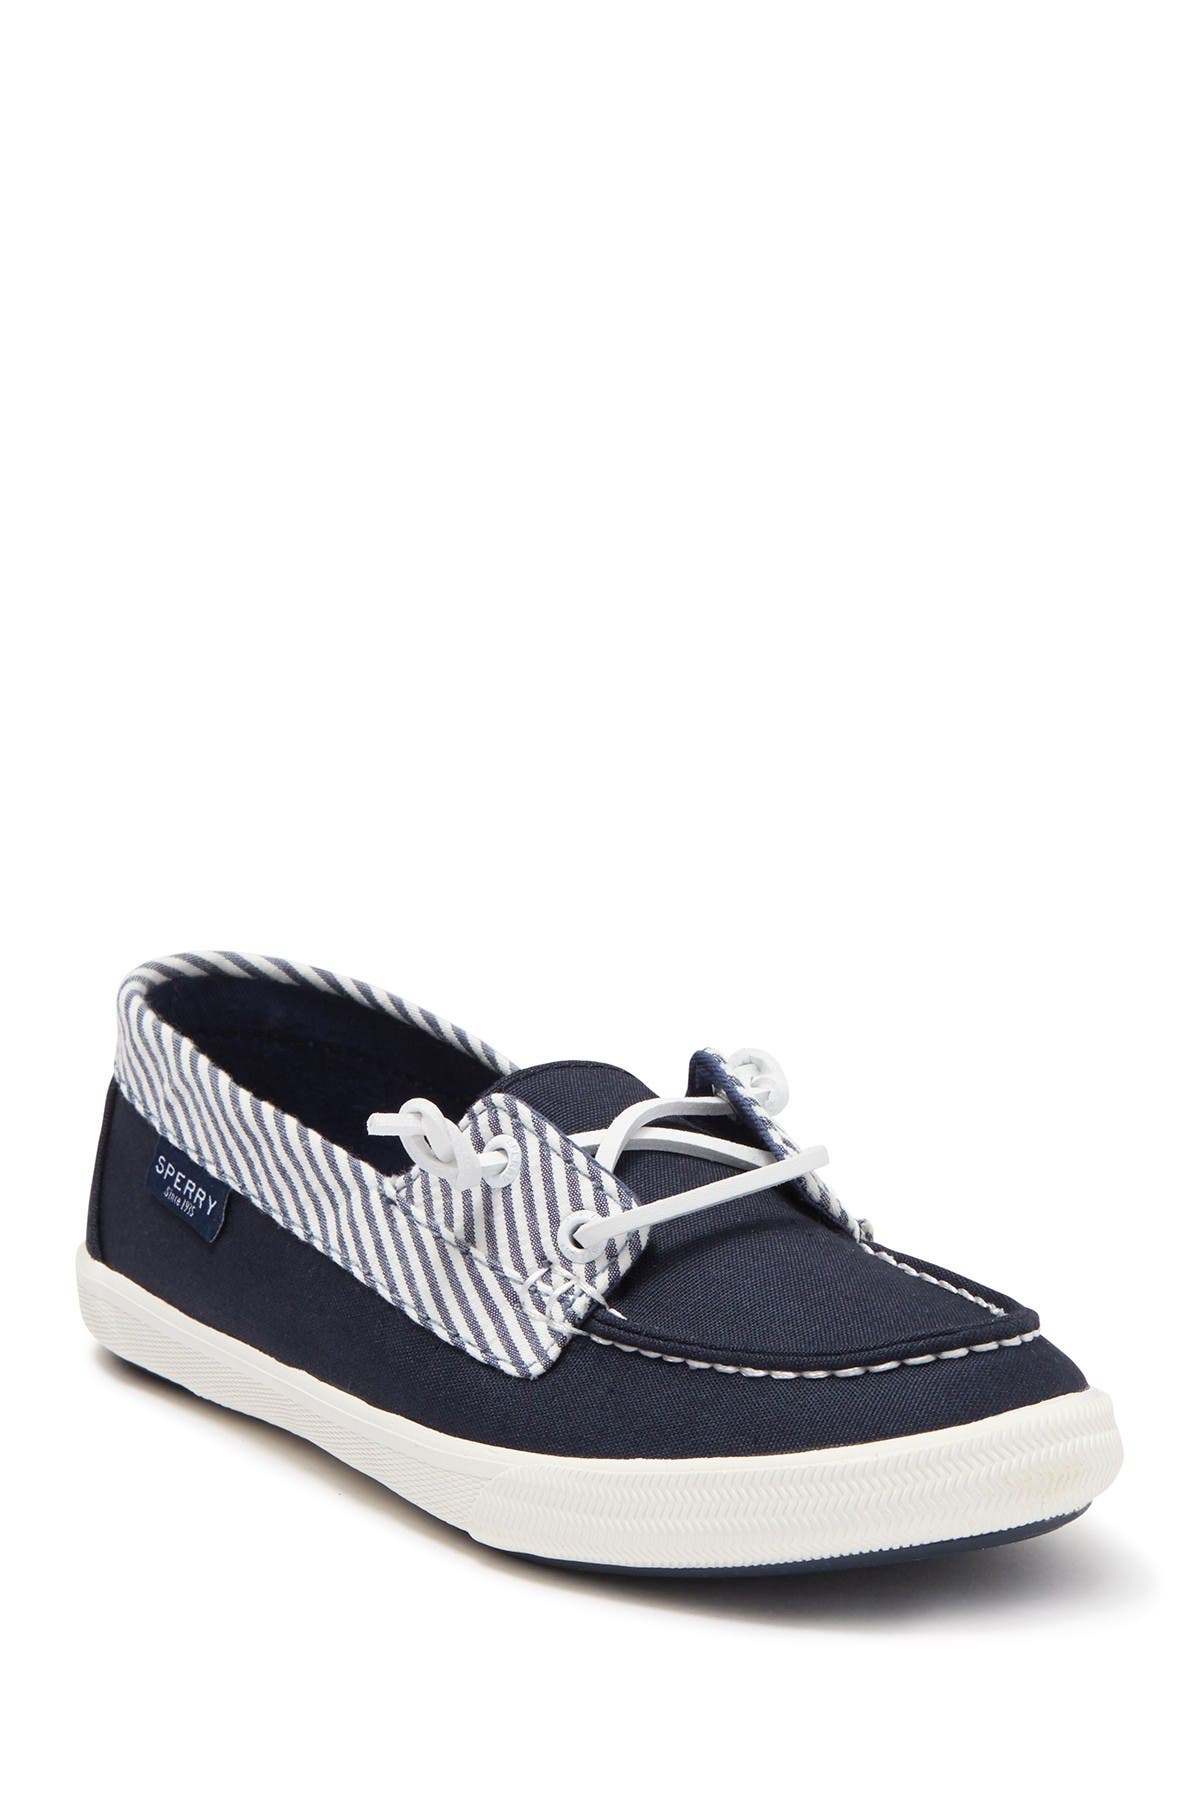 sperry lounge away grey